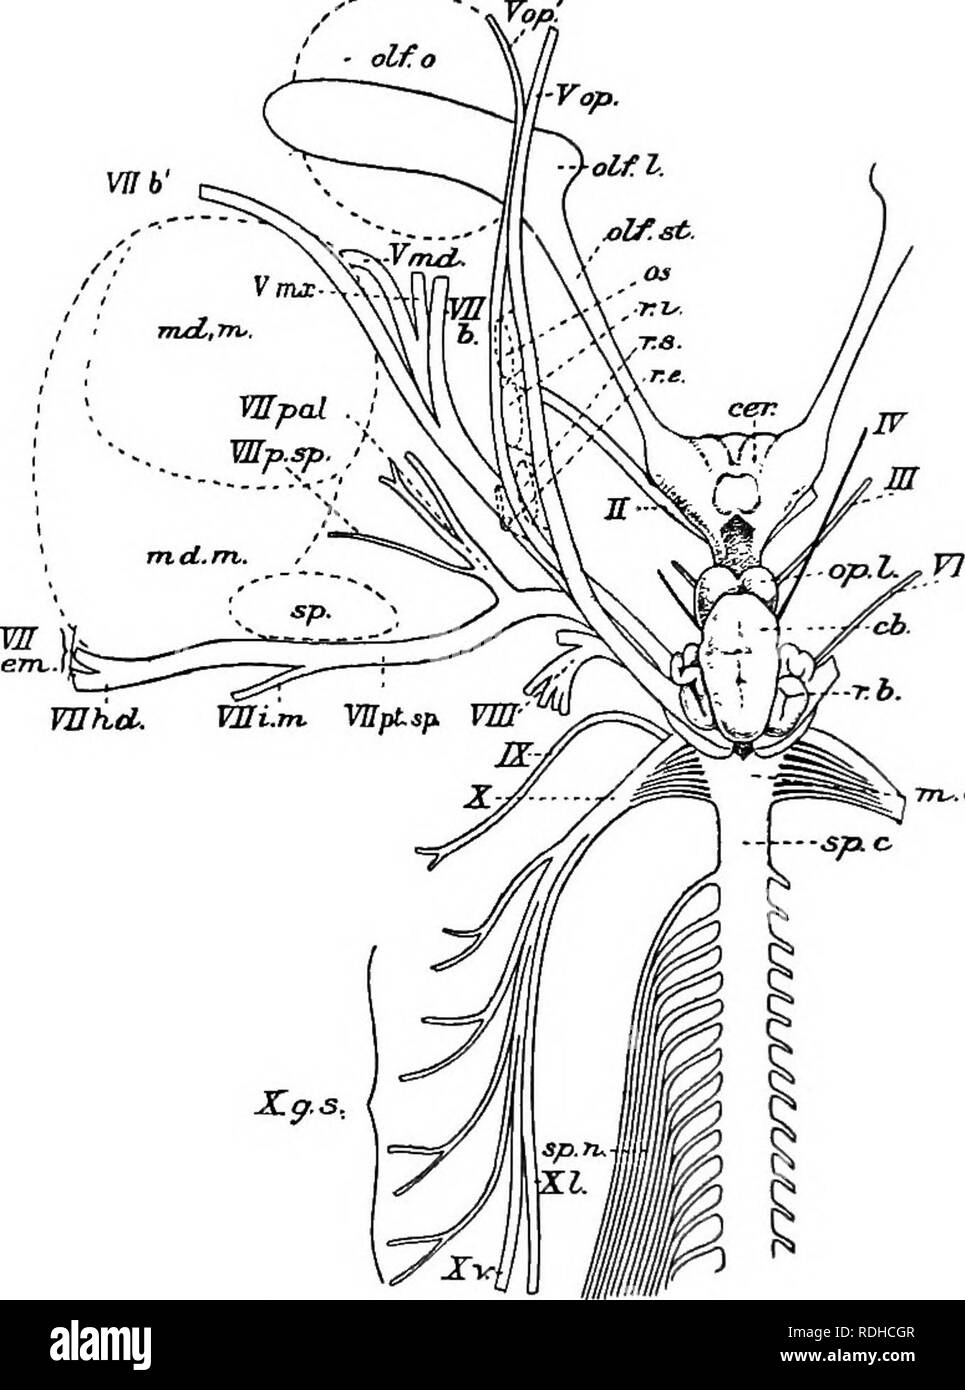 . A manual of elementary zoology . Zoology. 378 MANUAL OF ELEMENTARY ZOOLOGY seen to be two ophthalmic nerves, one of which—the superficial ophthalmic—passes above certain of the eye. Fig. 270.—The central nervous system of a skate. cd.f Cerebellum; cer., cerebrum; m.o., medulla oblongata; md.m., mandibular muscle ; olf.L, olfactory lobe ; olf.o.t olfactory organ ; olf.st., stalk of olfactory lobe; op.l.) optic lobe; os*t superior oblique muscle; r.6., resliform body; r.e.t r.i.j r.s,, external, internal, and superior recti muscles; s6., spiracle; sp.c, spinal cord; sp.n&gt;, spinal nerves (co Stock Photo